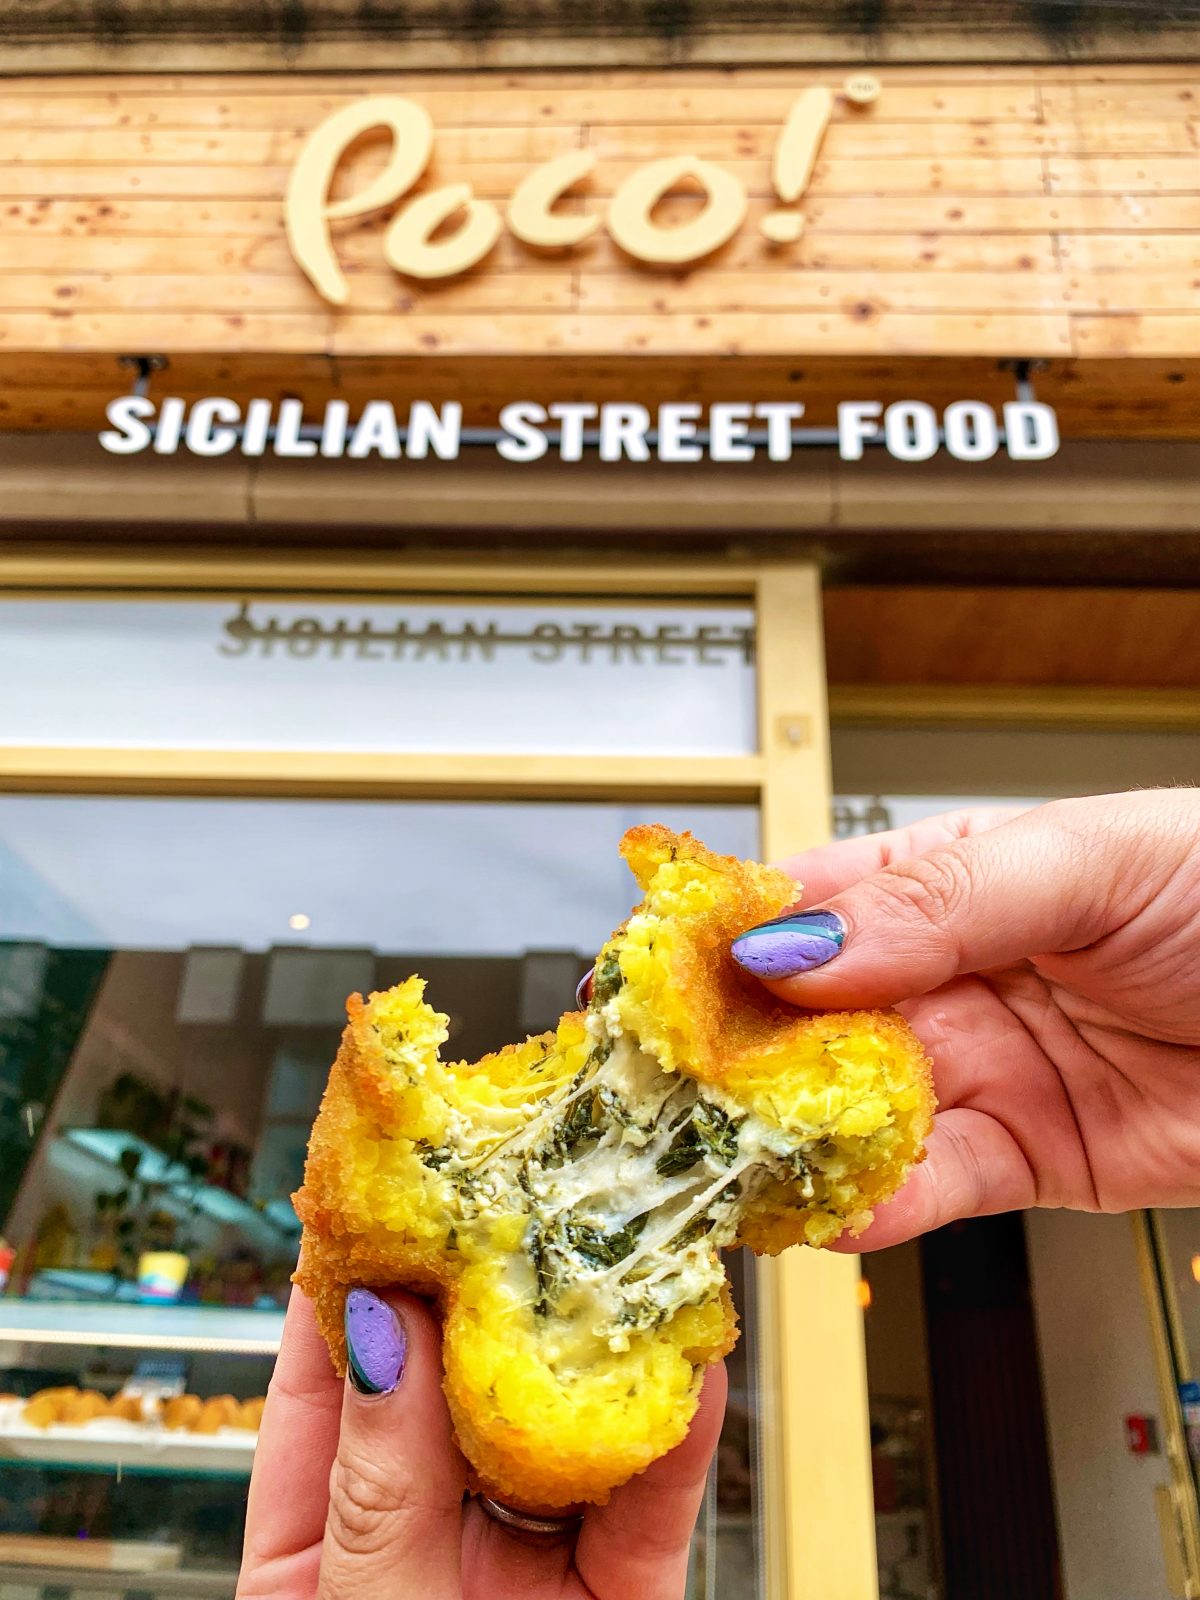 A ball of arancini being pulled apart under a POCO sign.